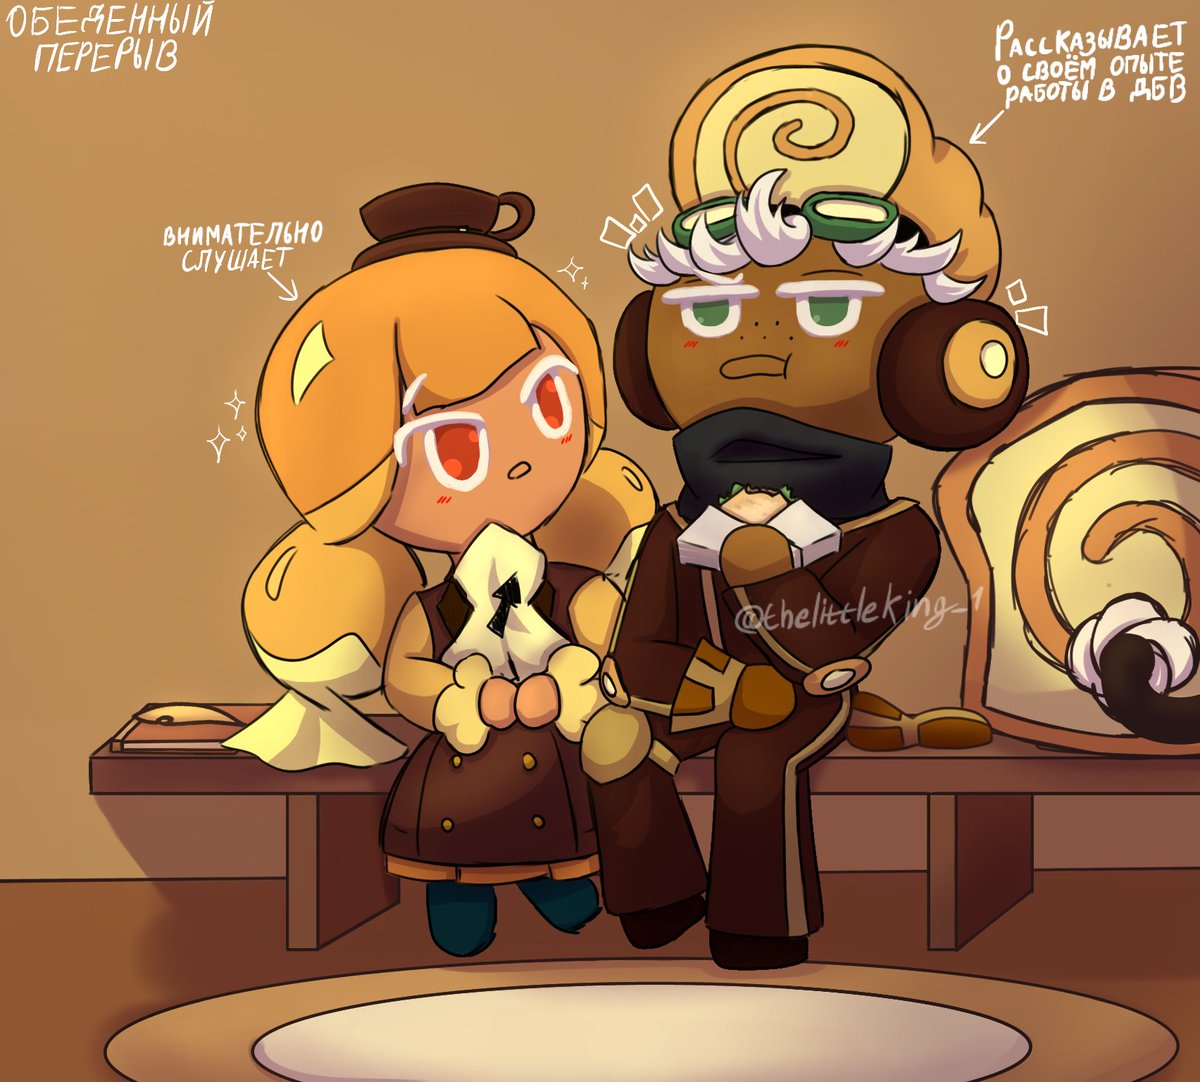 I love this sketch... 

'Lunch break

Marble Bread Cookie: *Tells about his experience in TBD*

Coffee Candy Cookie: *listening carefully* '

#cookierunovenbreak #coffeecandycookie #marblebreadcookie #tbd